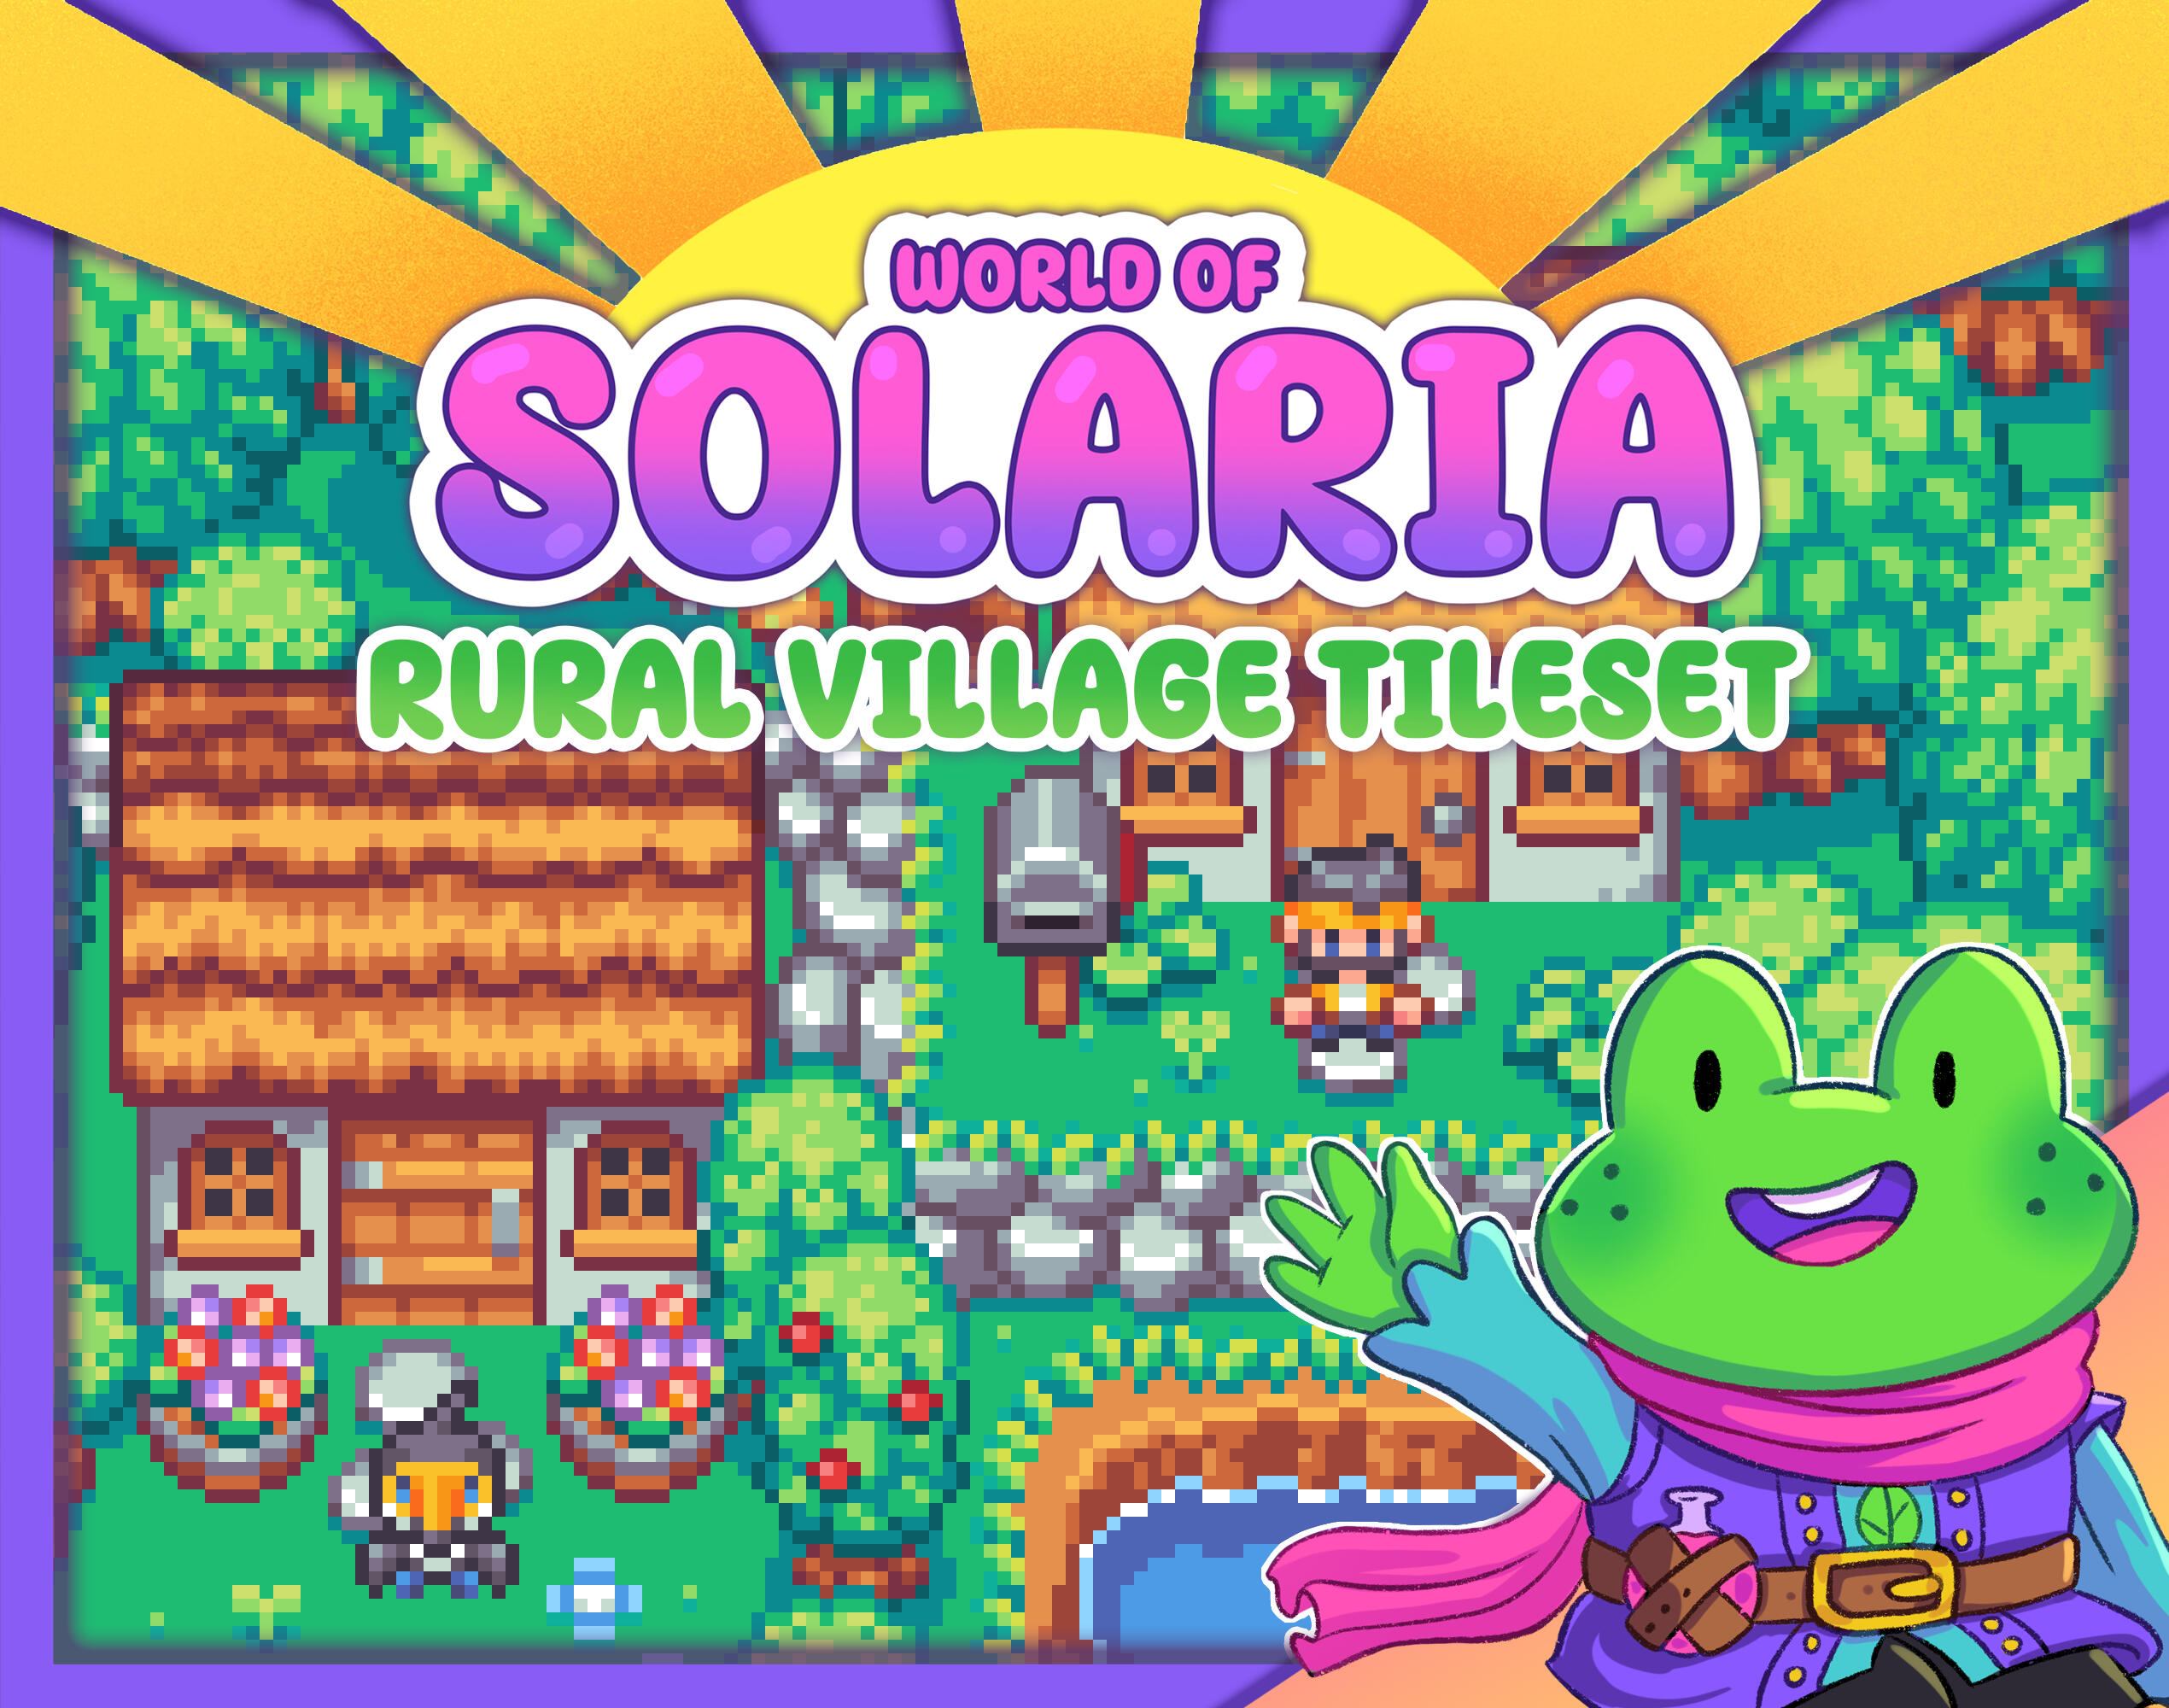 A thumbnail for Jamie Brownhill's World of Solaria UI Asset Pack. A green zombie sweats, while above it, a life bar is half full and an icon indicates the zombie is burning. In the background is a scene of a small green frog warrior slashing at a group of